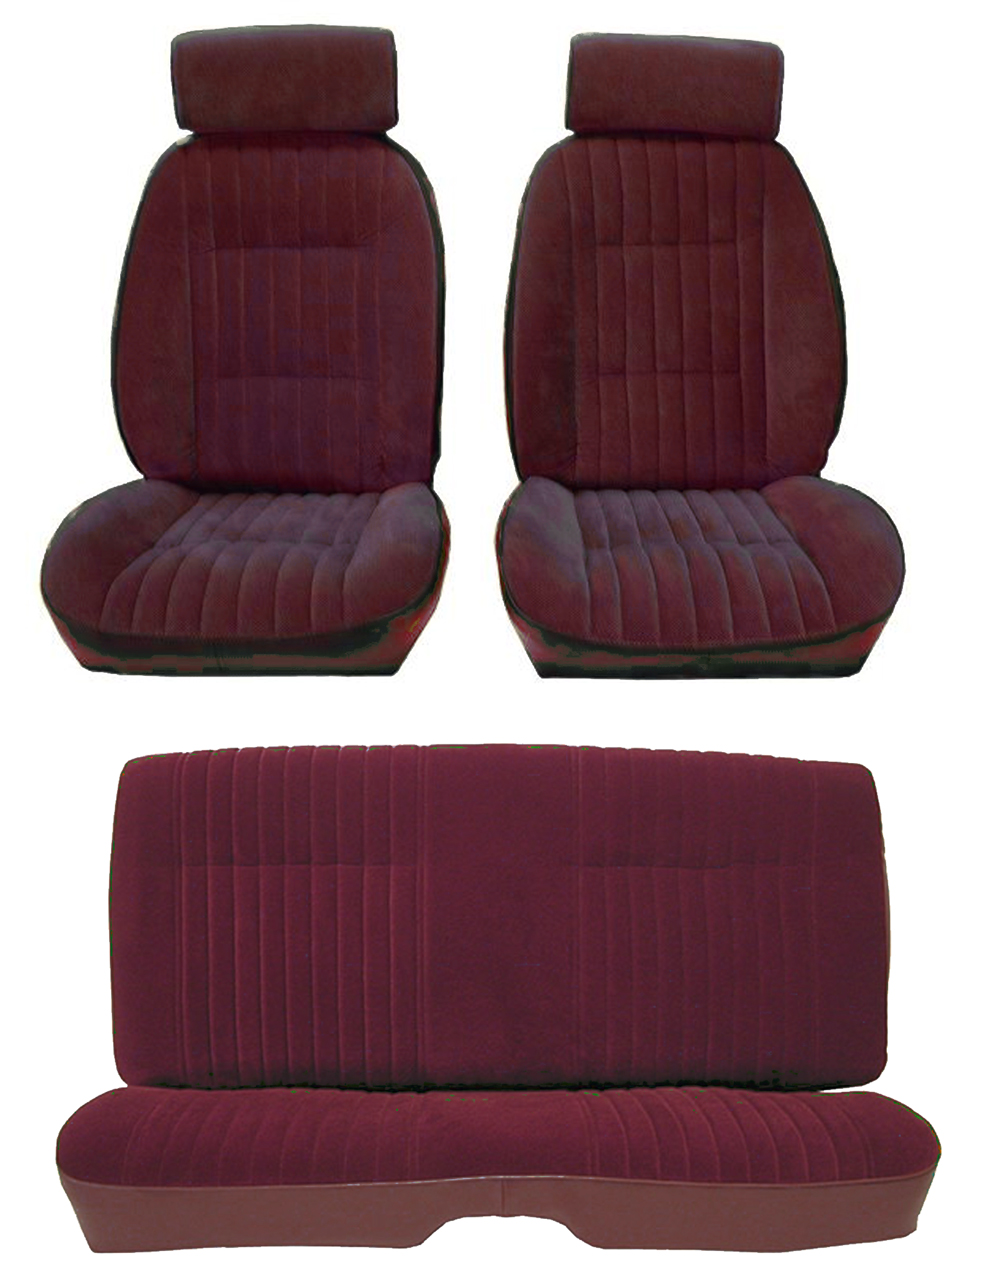 81-88 Monte Carlo SS Front Bucket and Rear Seat Covers Maple Vinyl